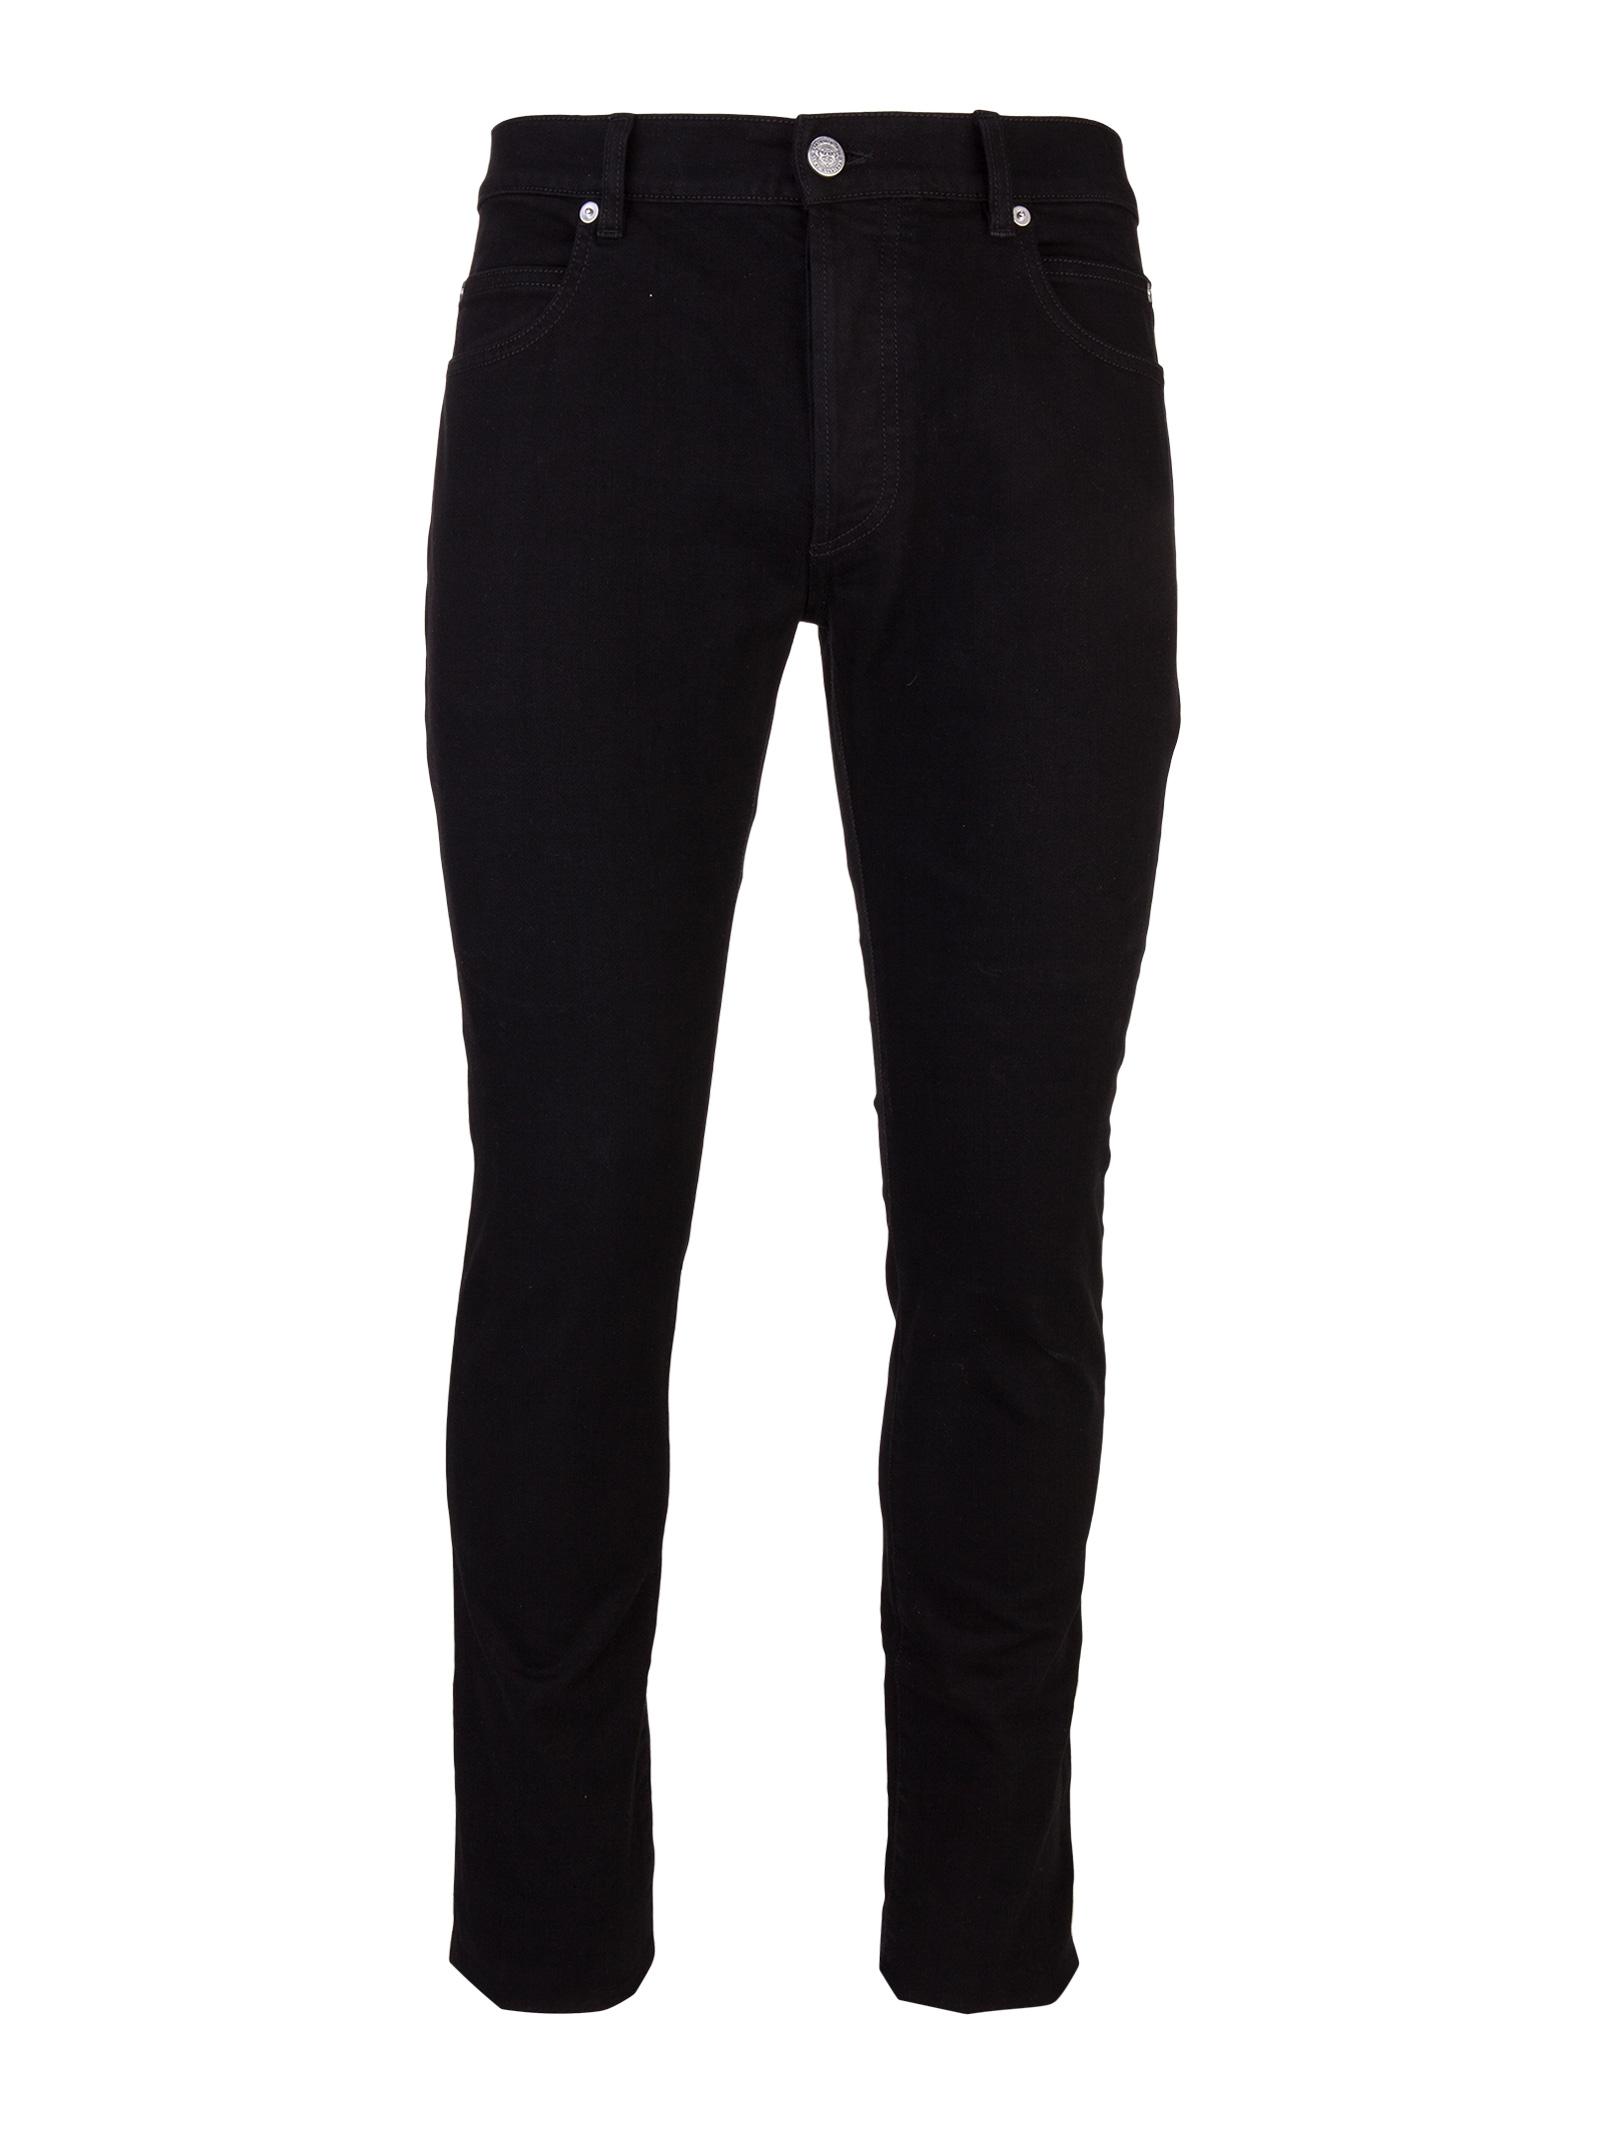 Balmain Black Cotton Blend Jeans With Five Pockets And Brand Logo Patch ...